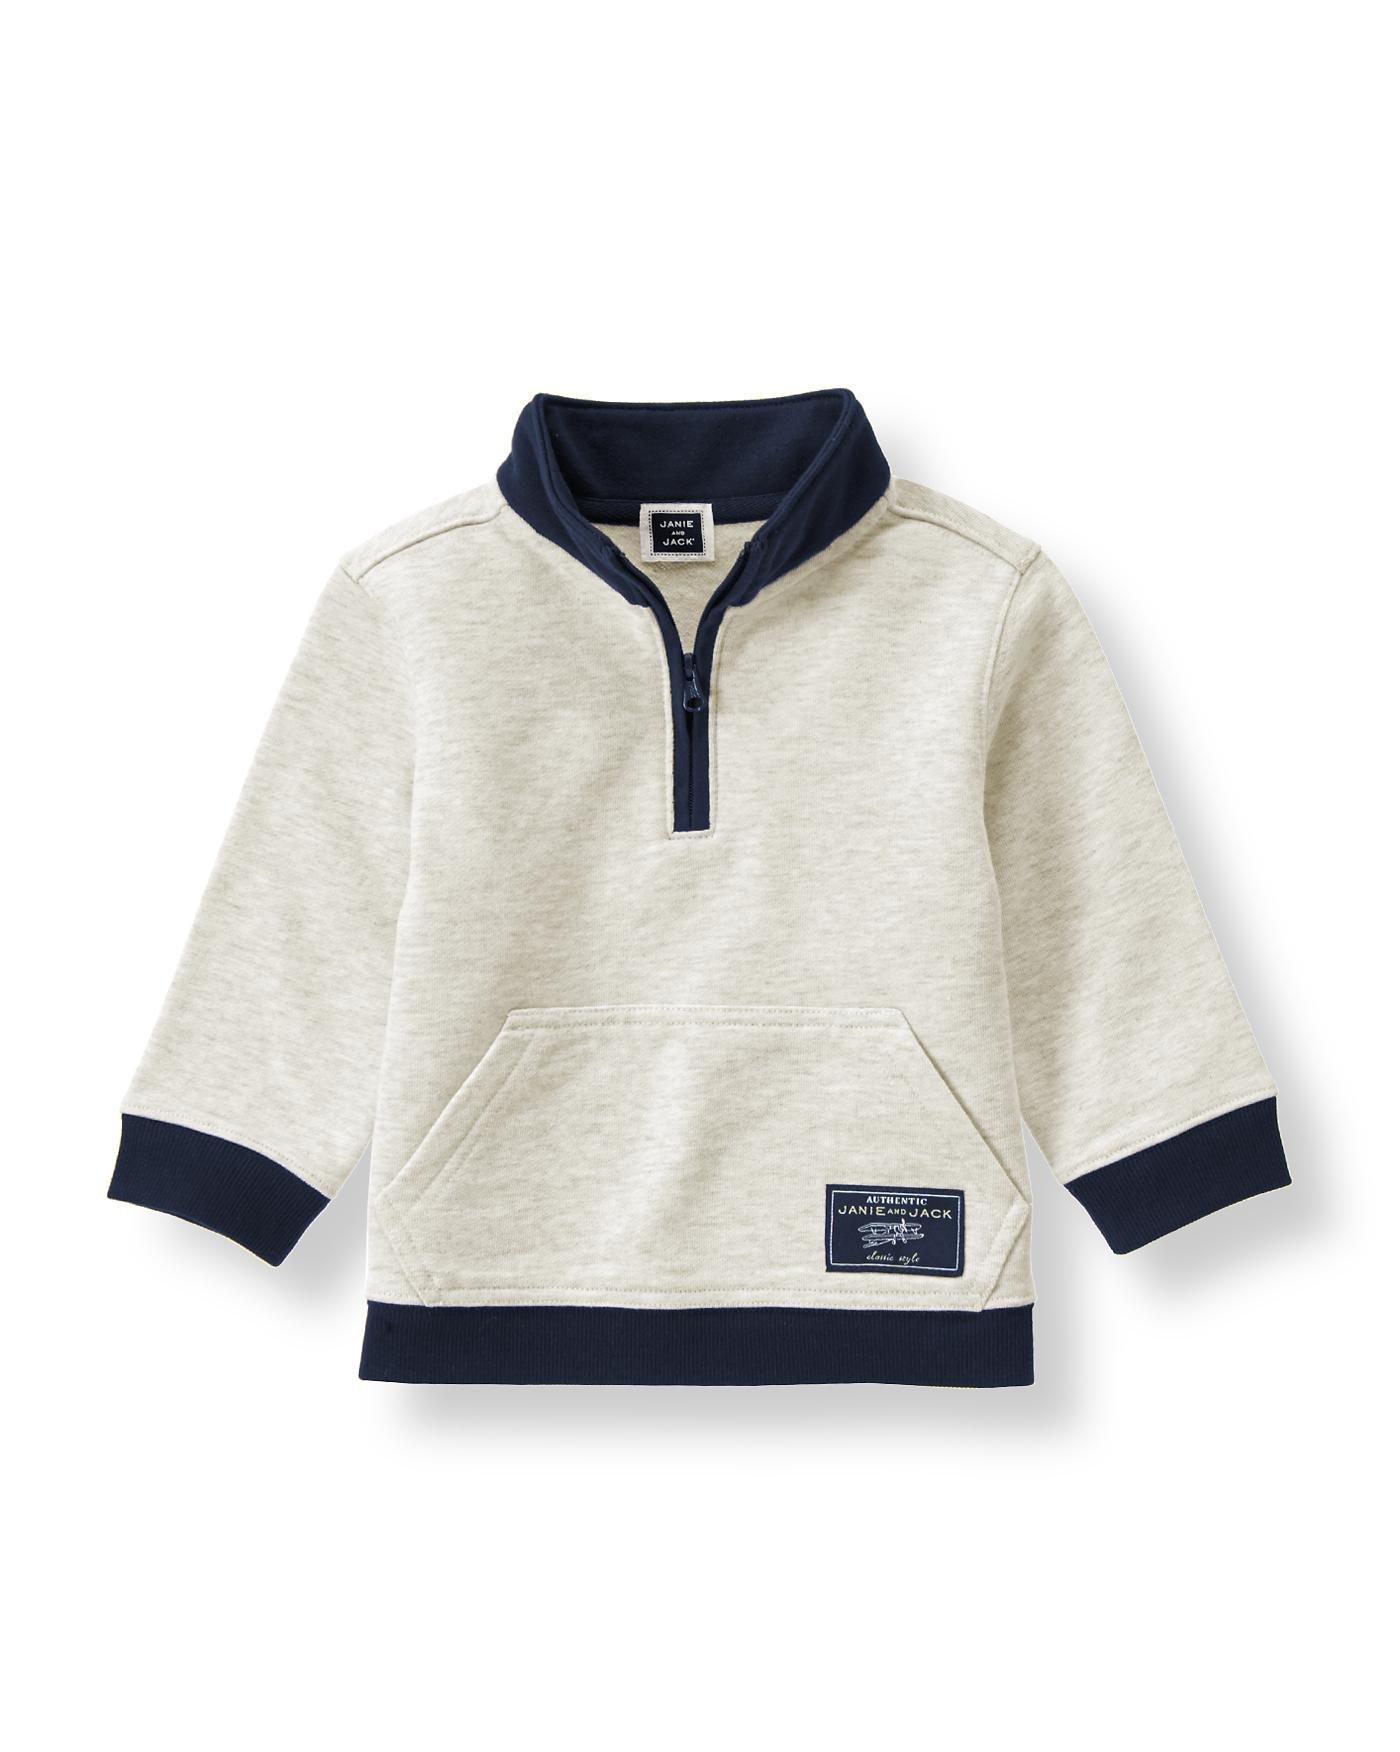 Contrast Pullover image number 0